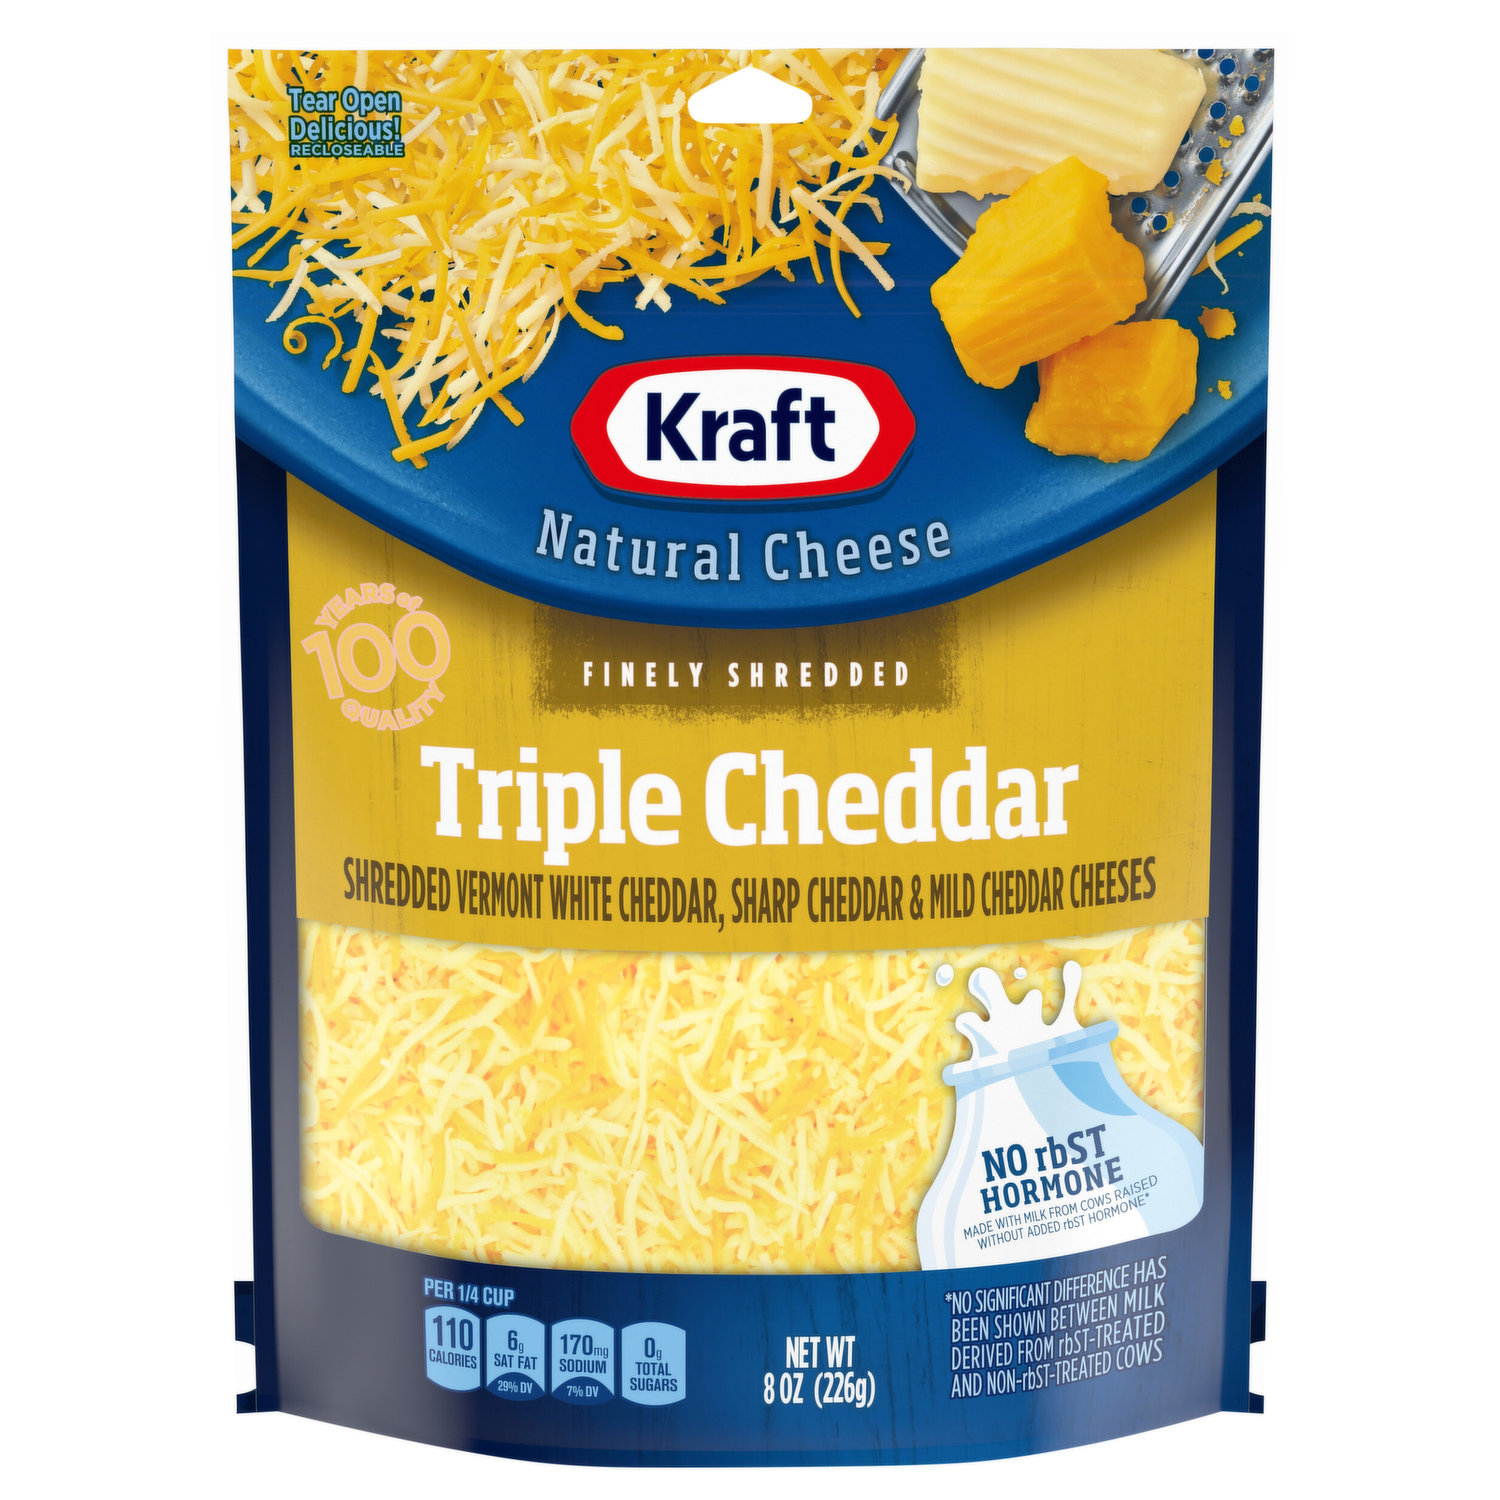 Land O Lakes Feather Shredded Mild Cheddar and Monterey Jack Cheese Blend,  5 Pound -- 4 per case.